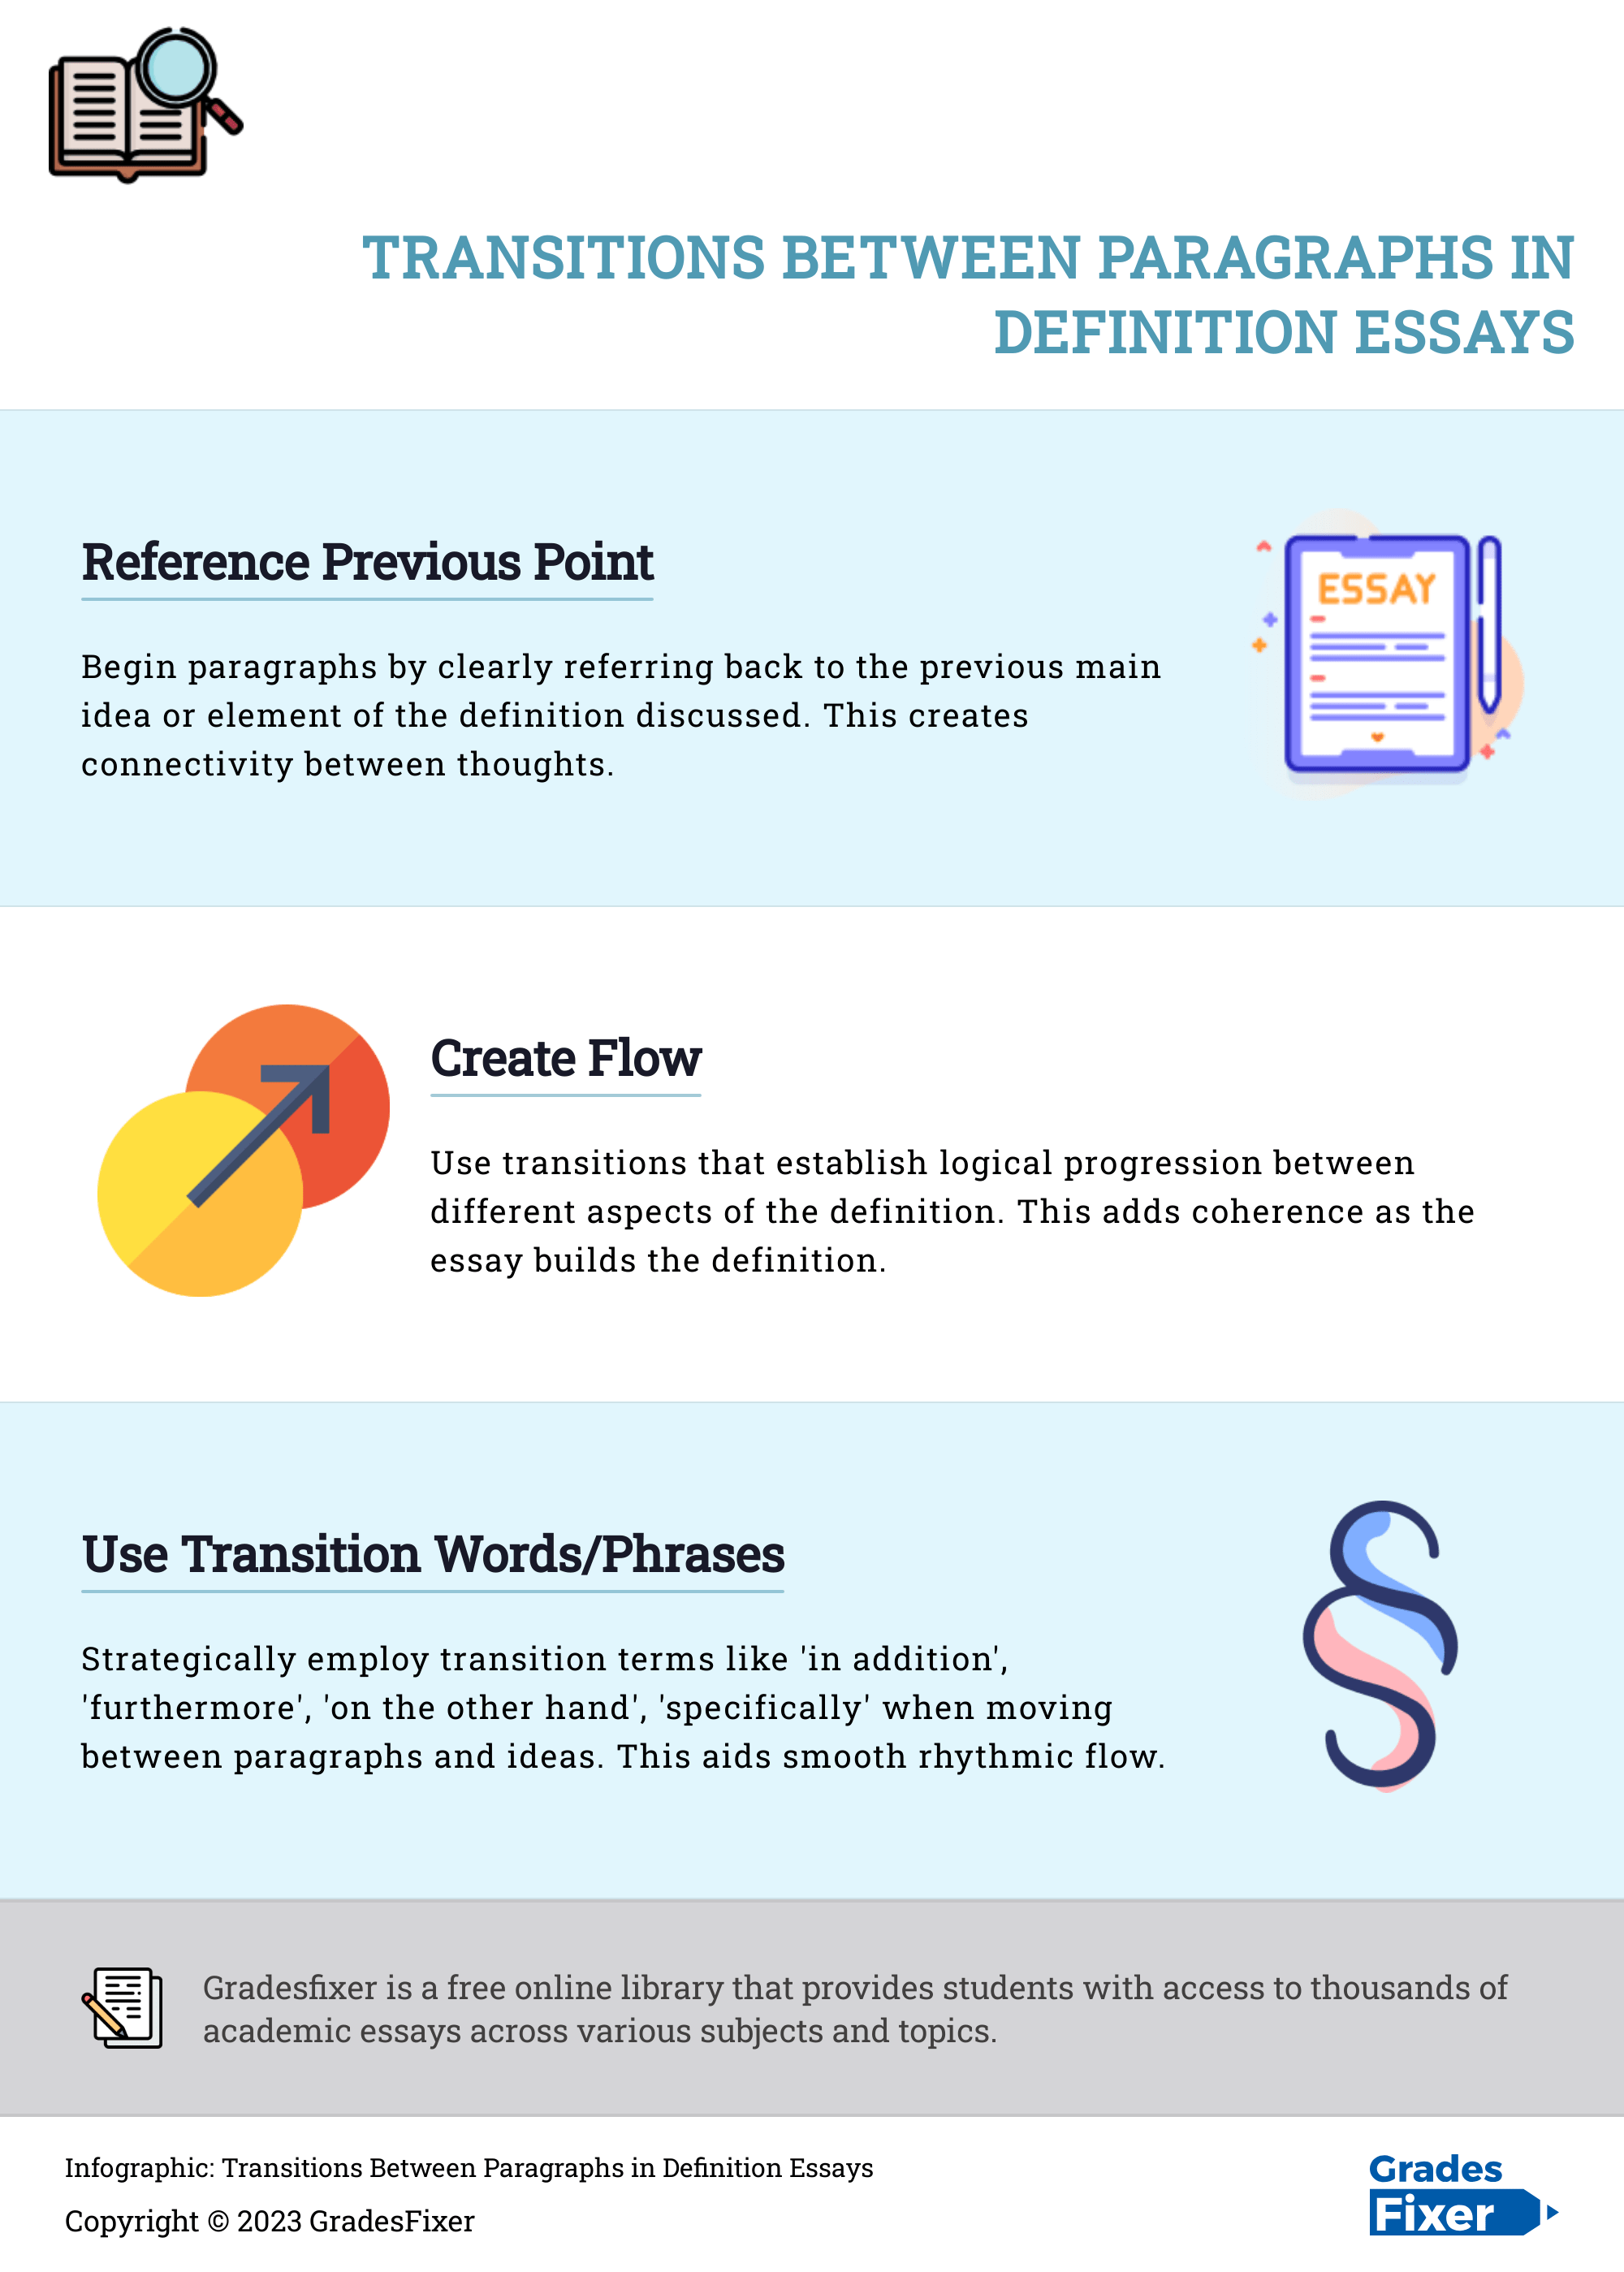 Infographic-Transitions-Between-Paragraphs-in-Definition-Essays